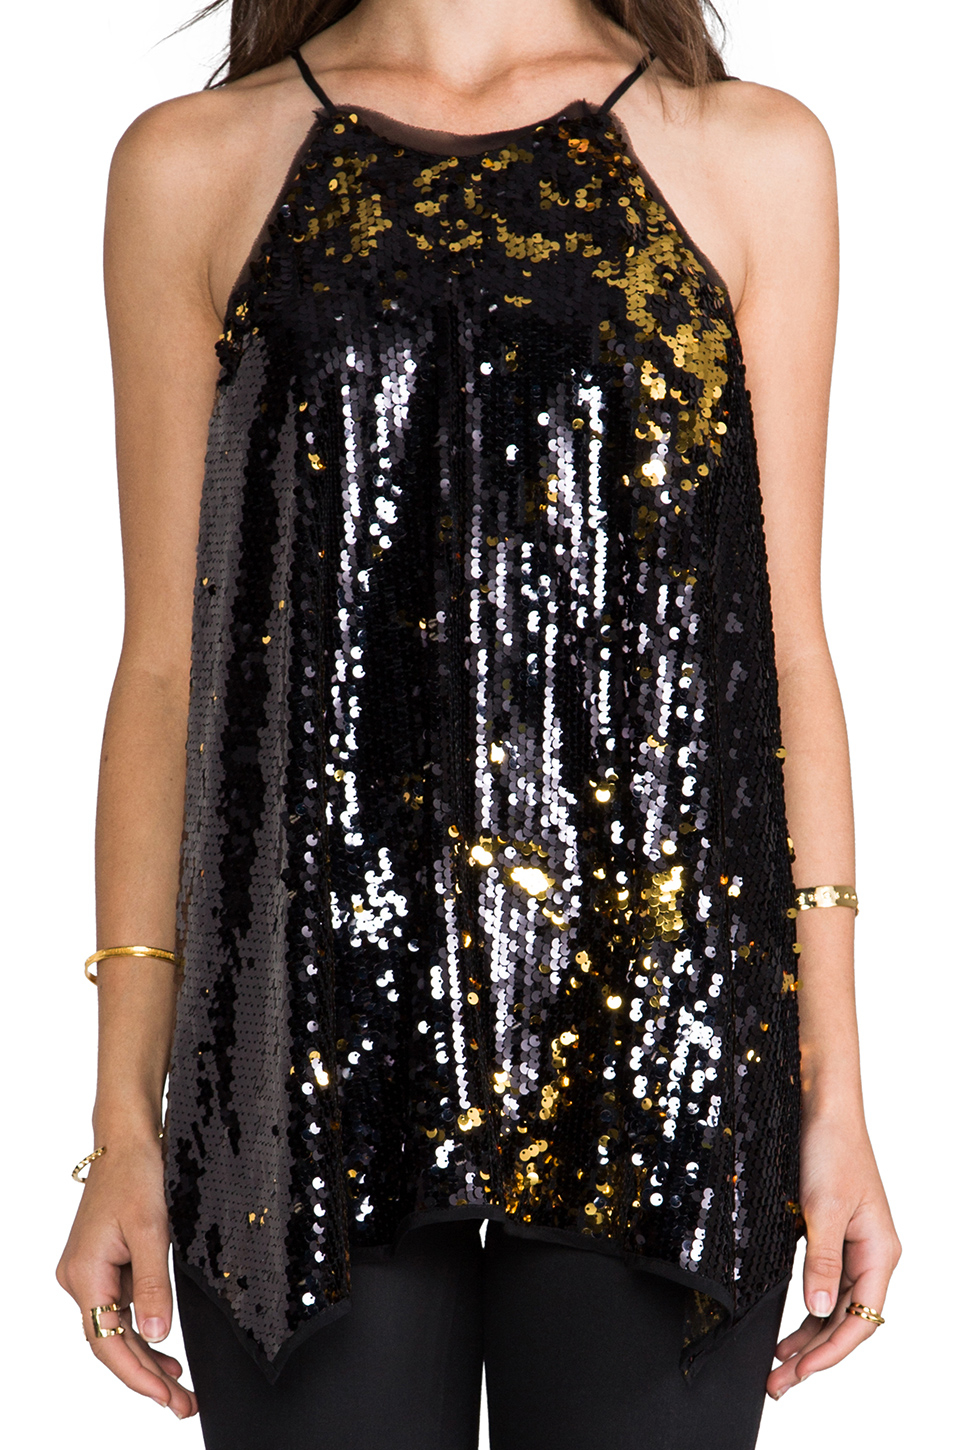 Lyst - Milly Stretch Sequins Tank in Metallic Gold in Metallic